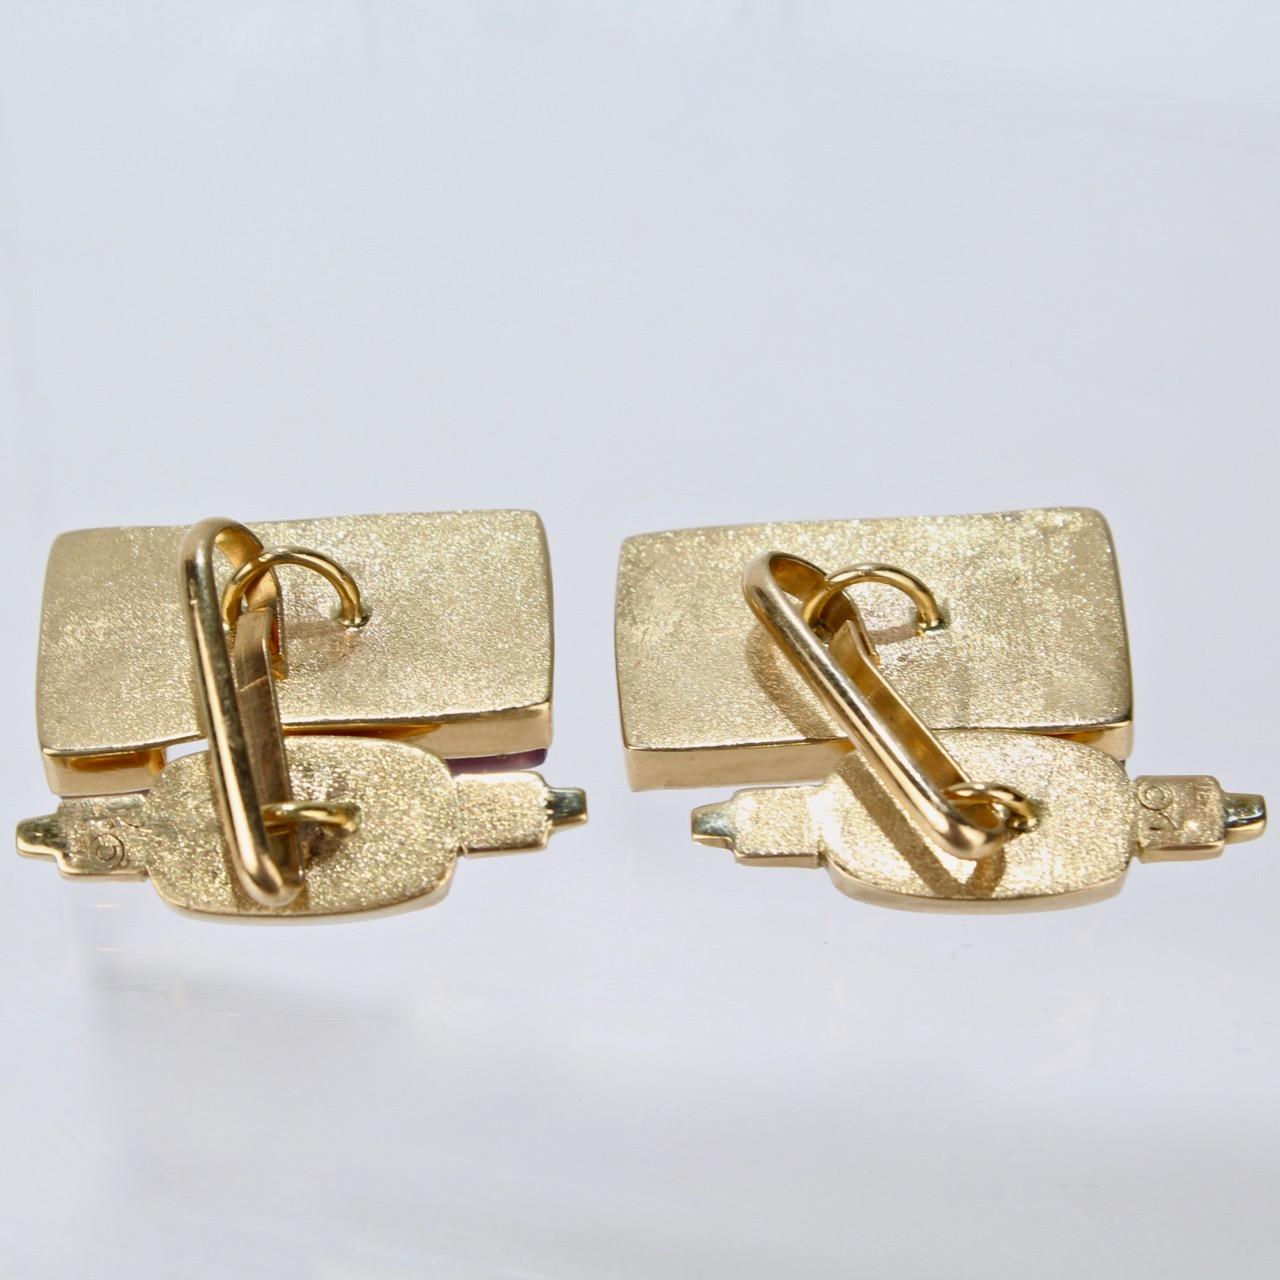 Isabelle Posillico Ametrine and Yellow Gold Cufflinks 6